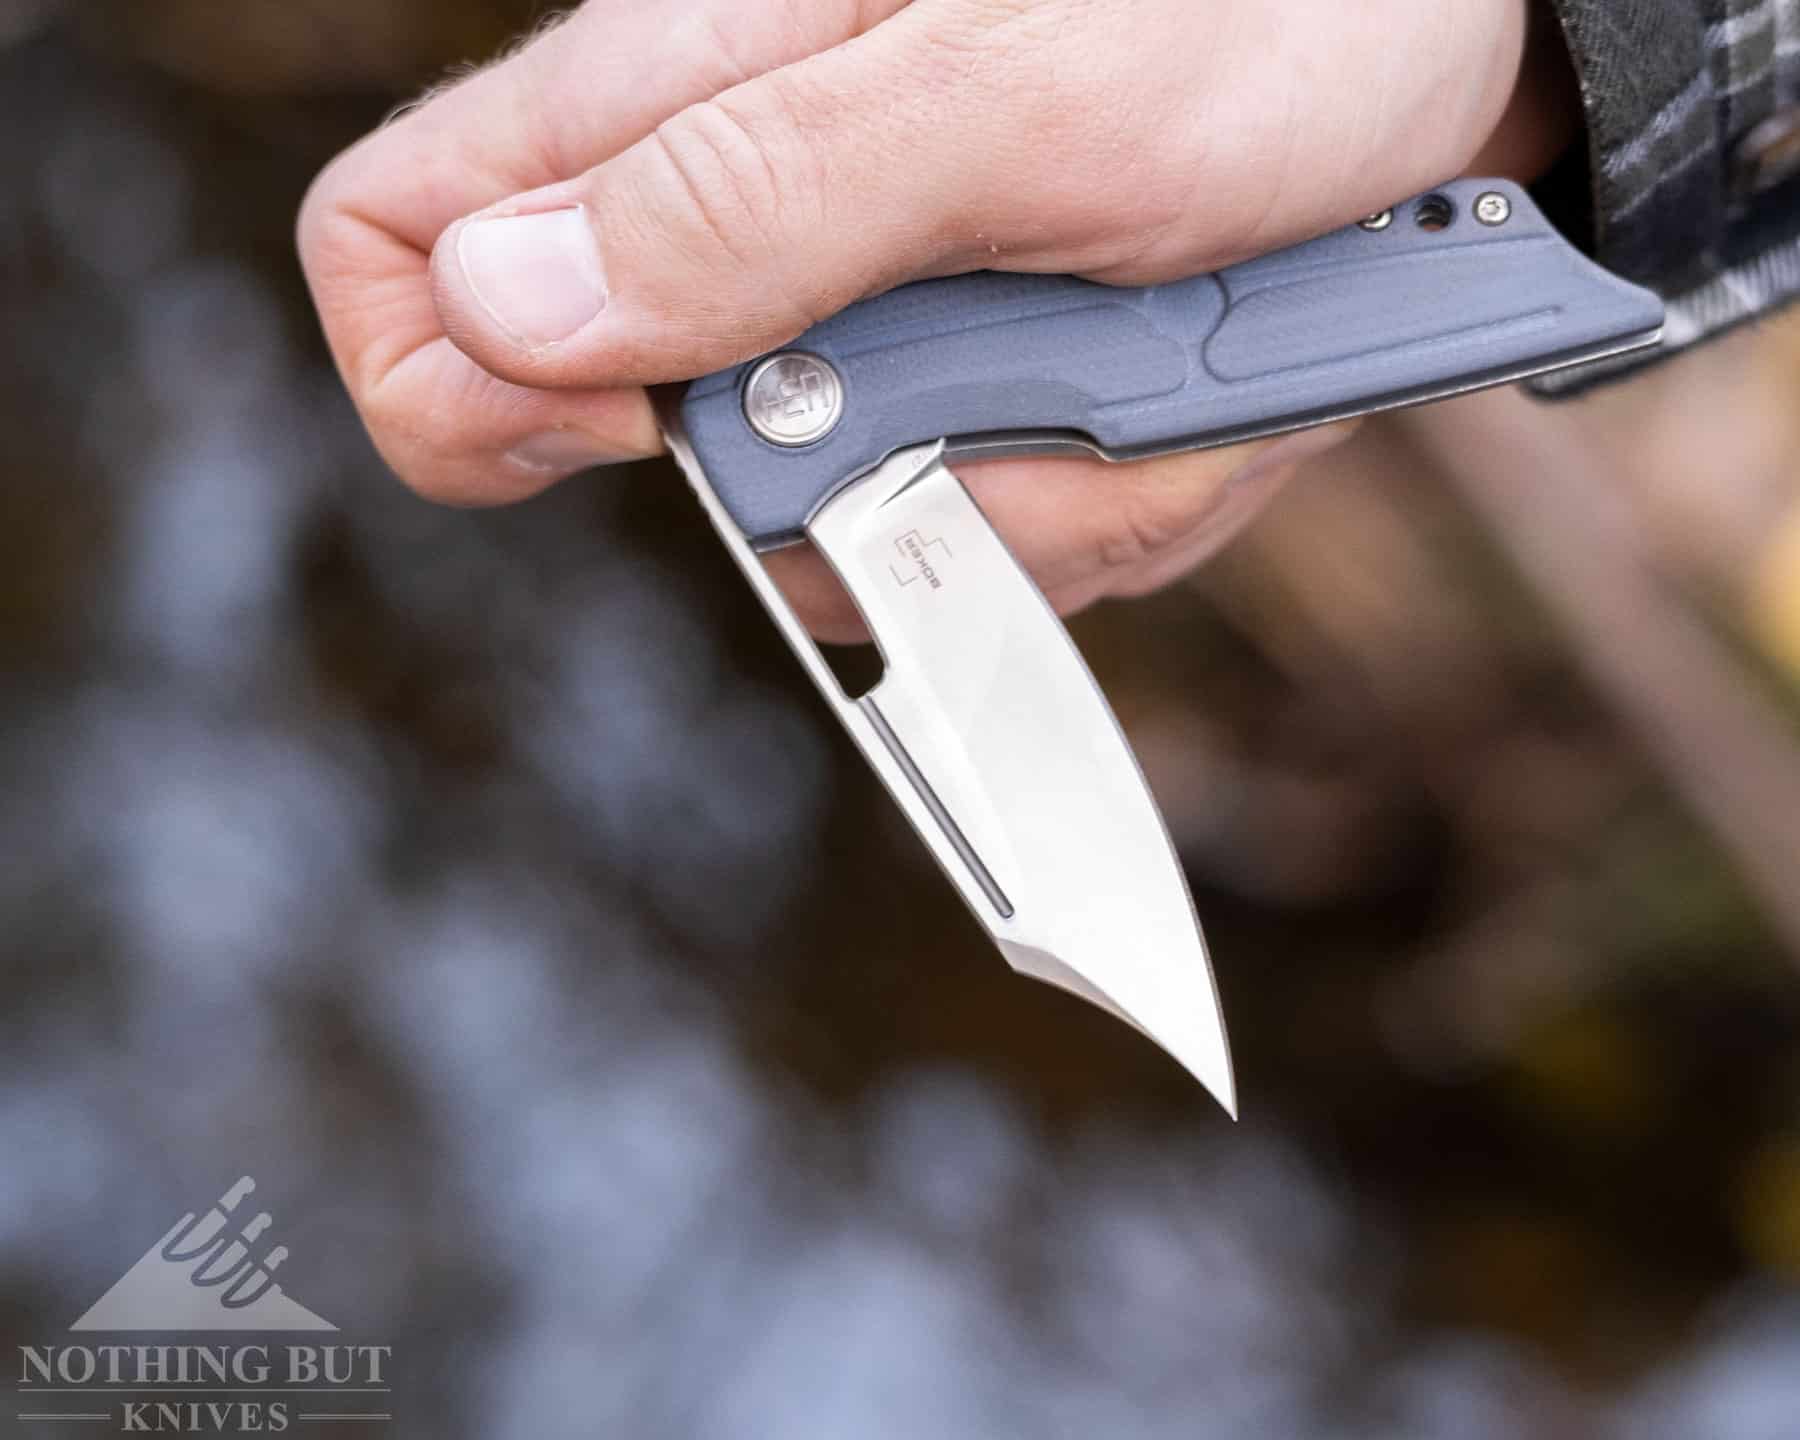 This image shows how the Boker Plus HEA Hunter can be opened with the index finger.